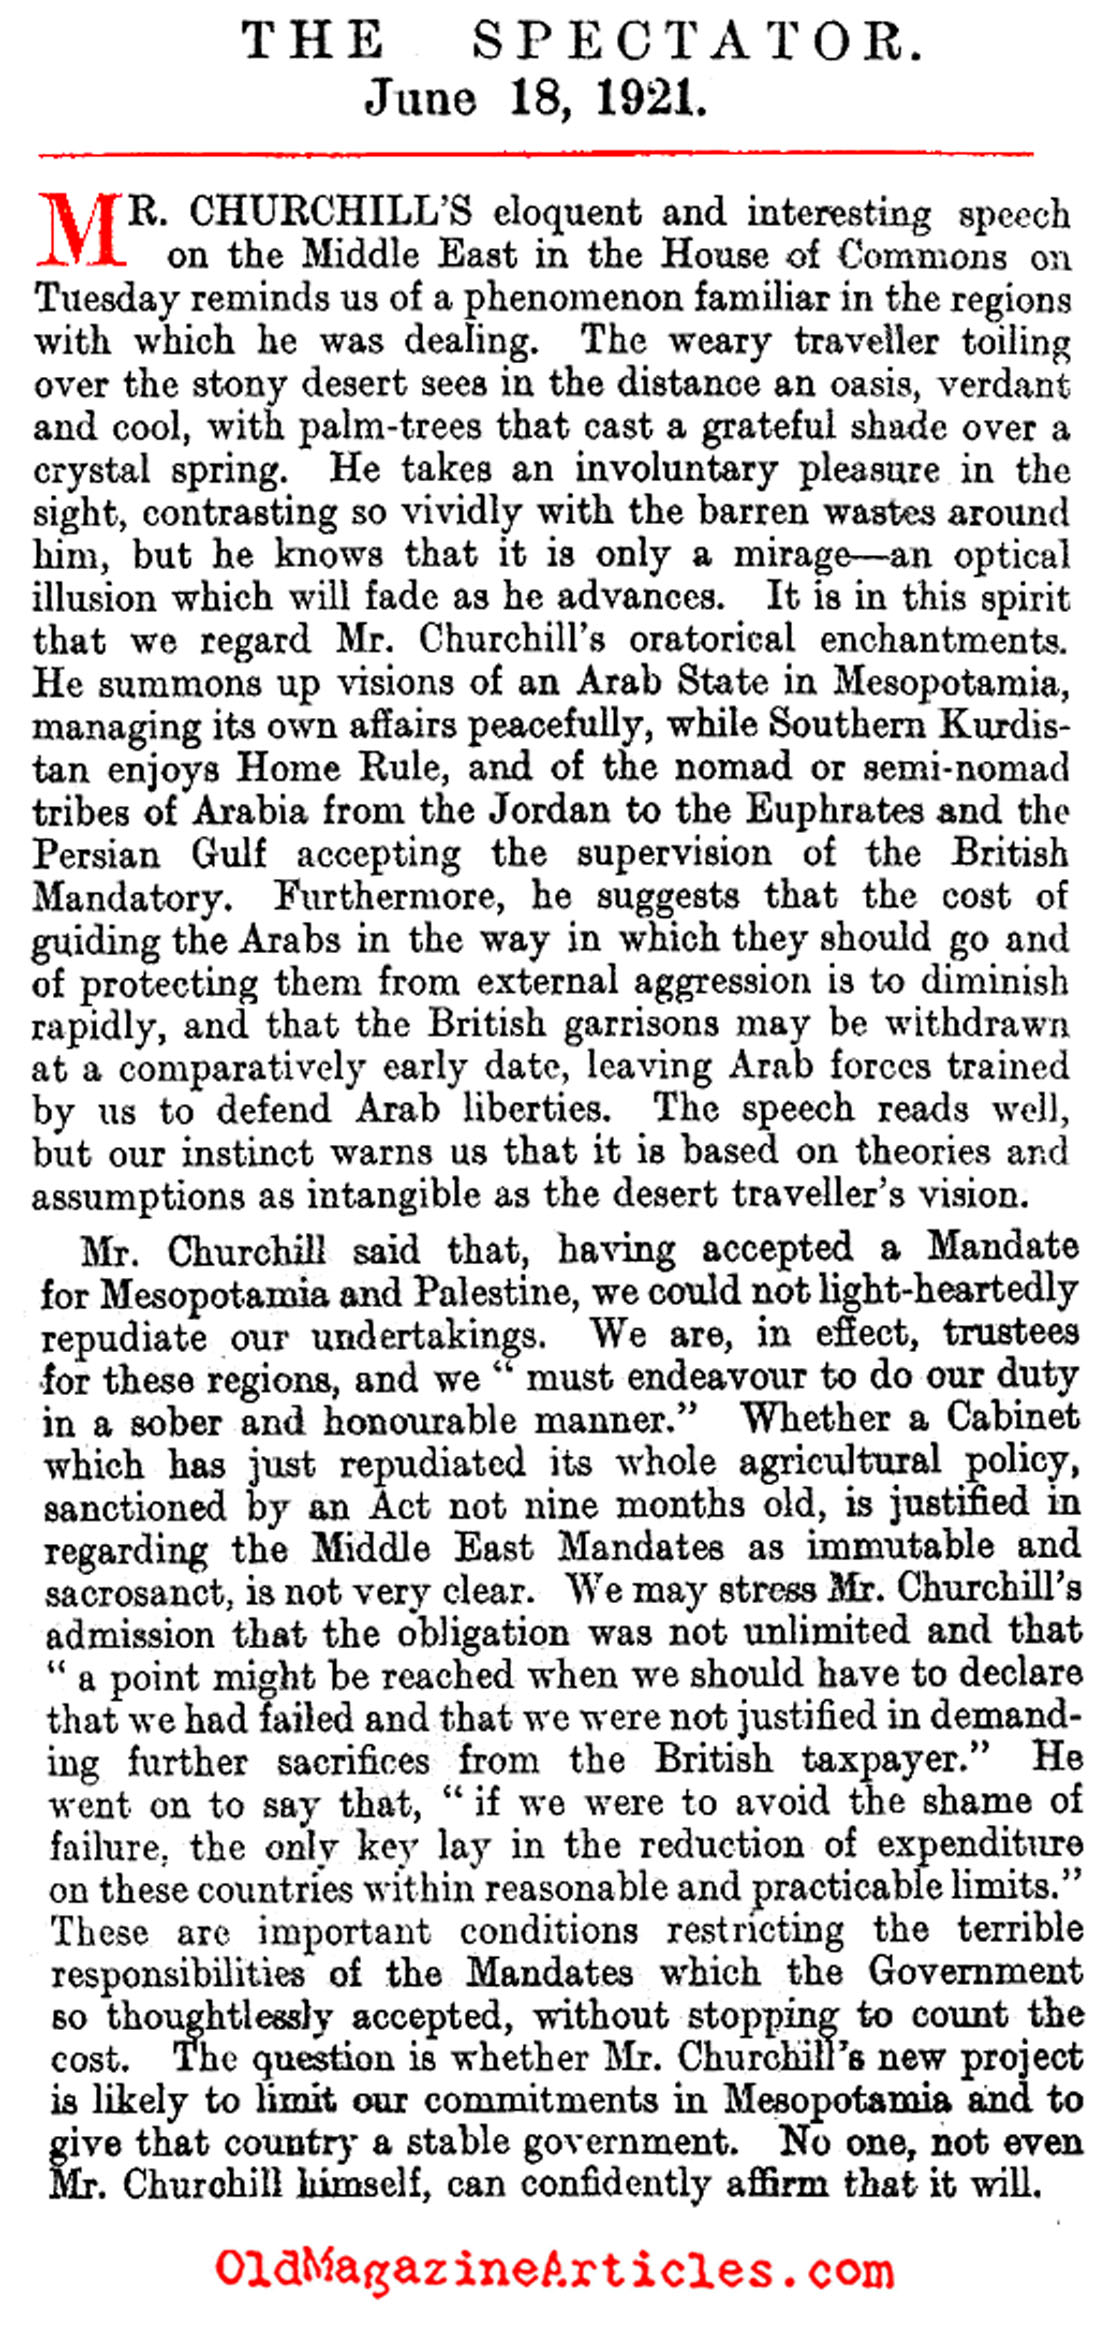 Winston Churchill and the Mesopotamia Occupation   (The Spectator, 1921)